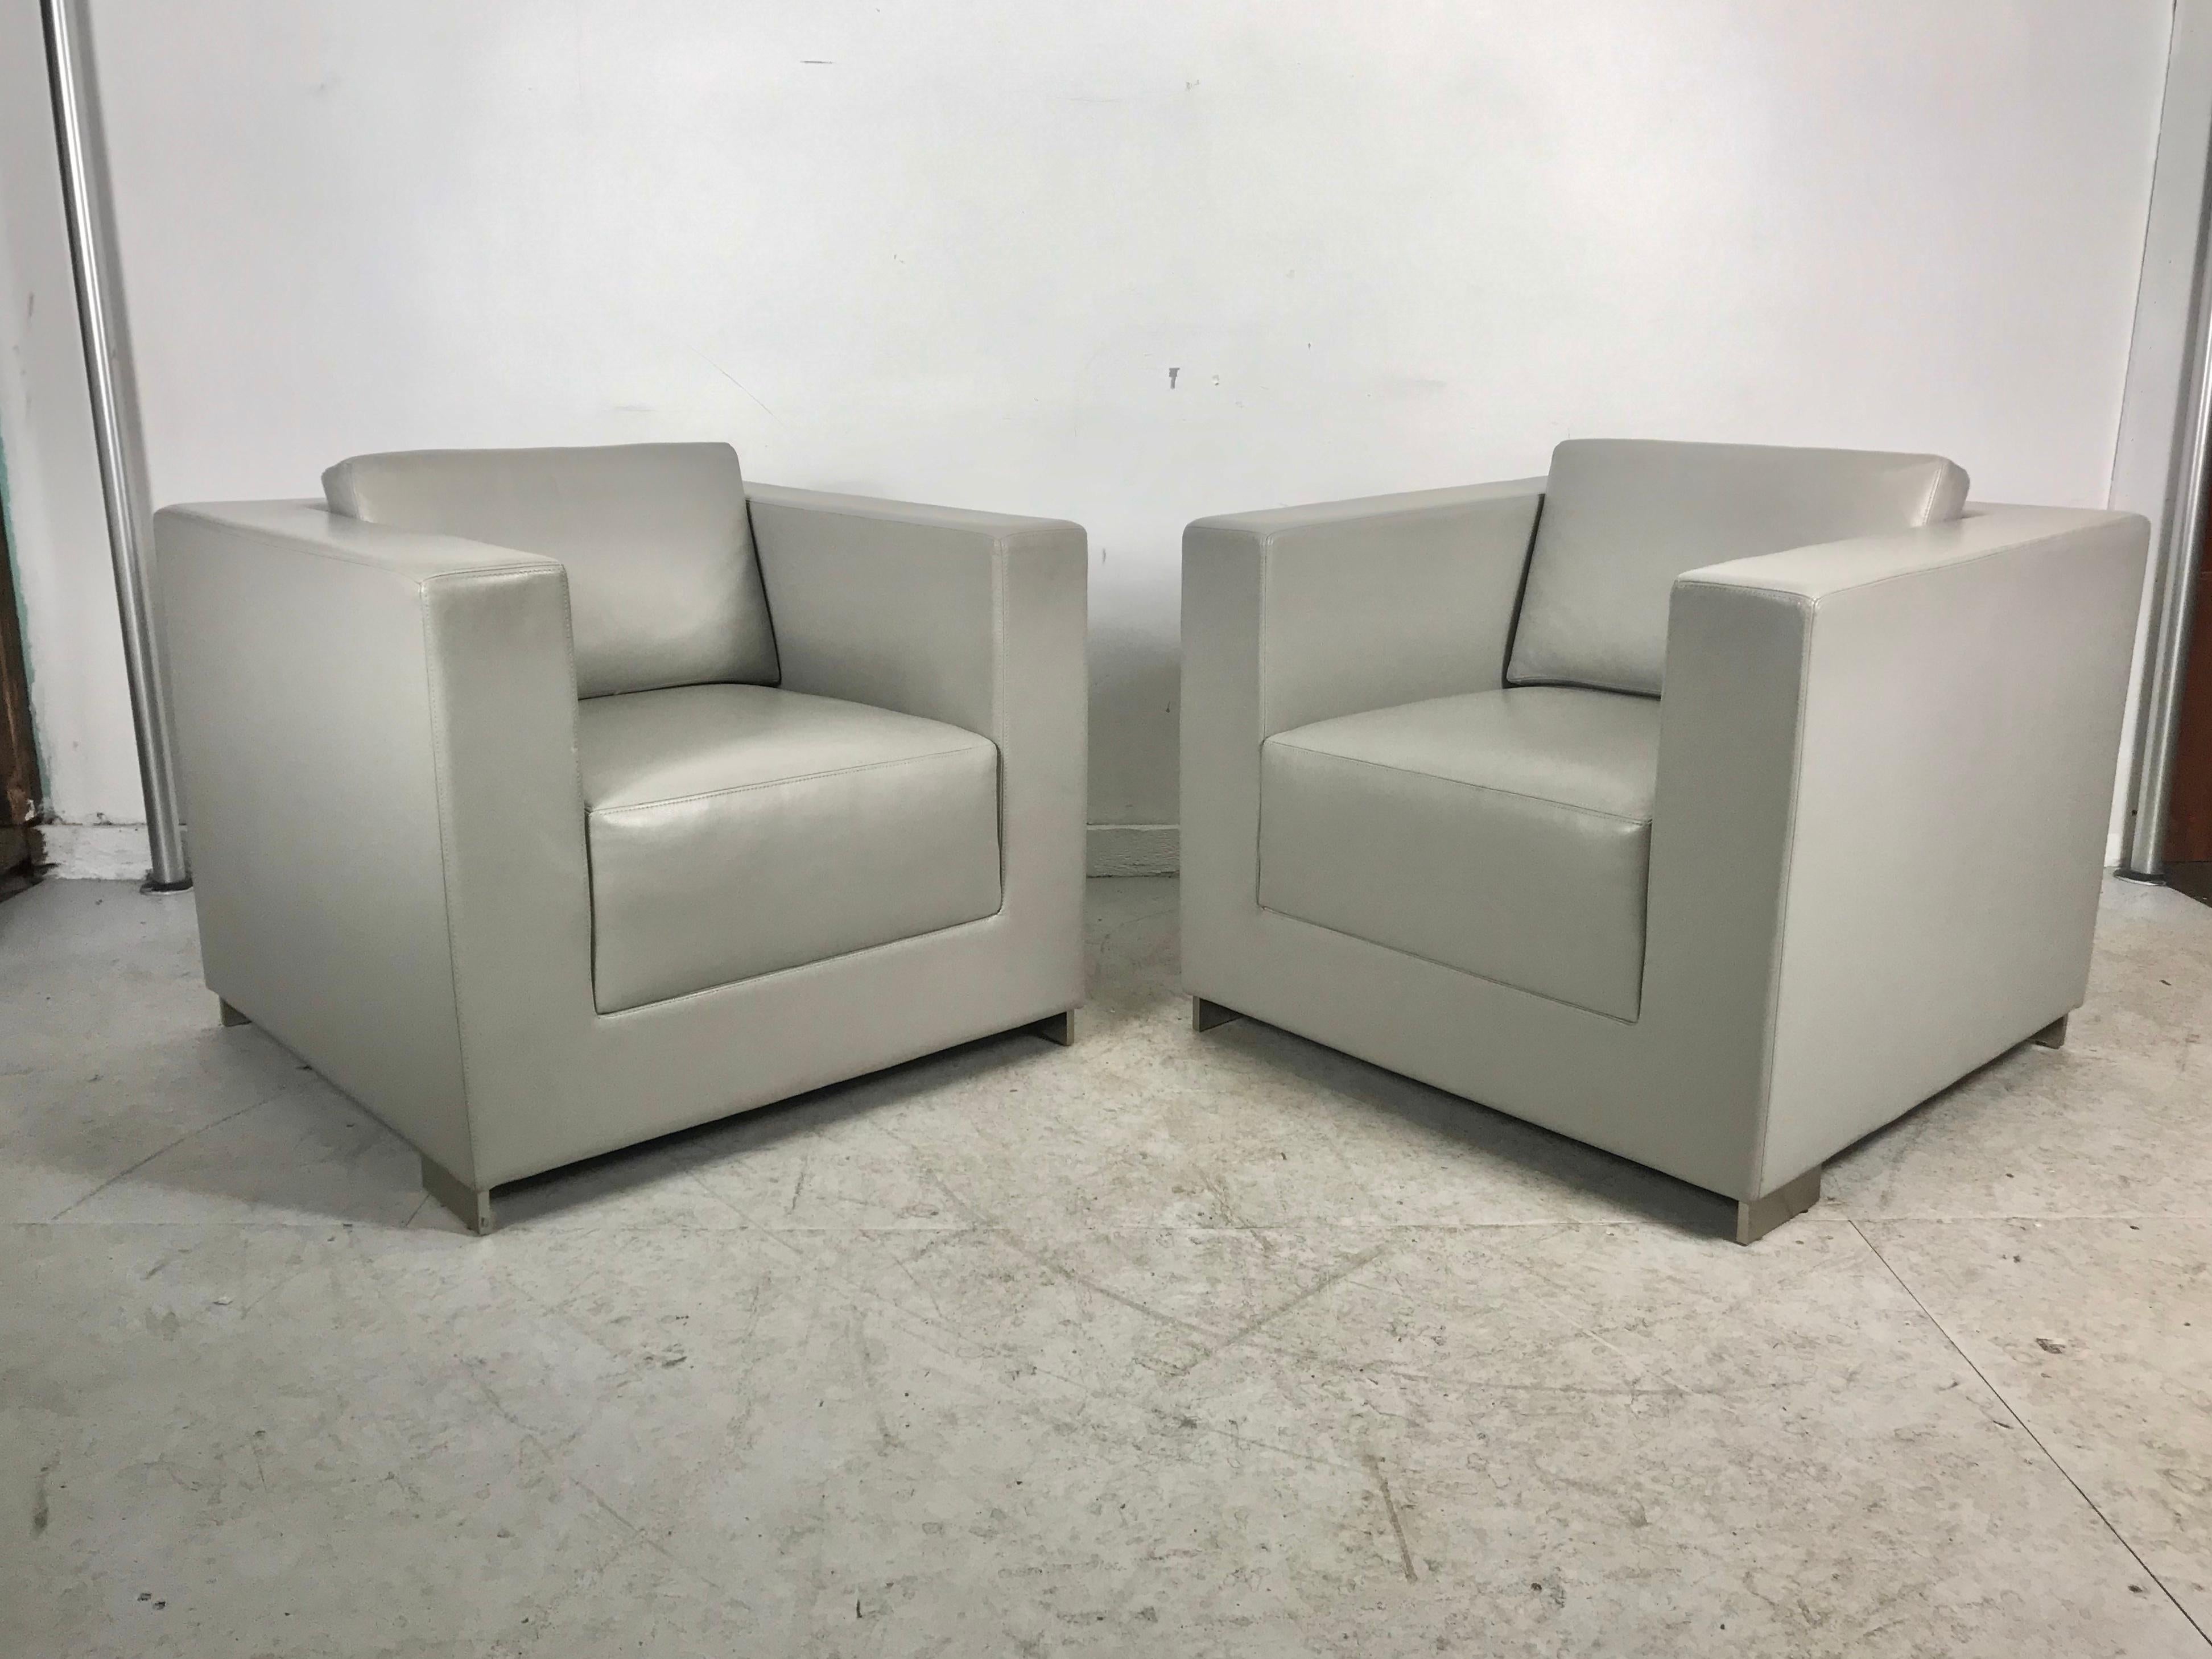 Contemporary Stunning Pair of Leather Cube Lounge Chairs by Fabien Baron for Bernhardt Design